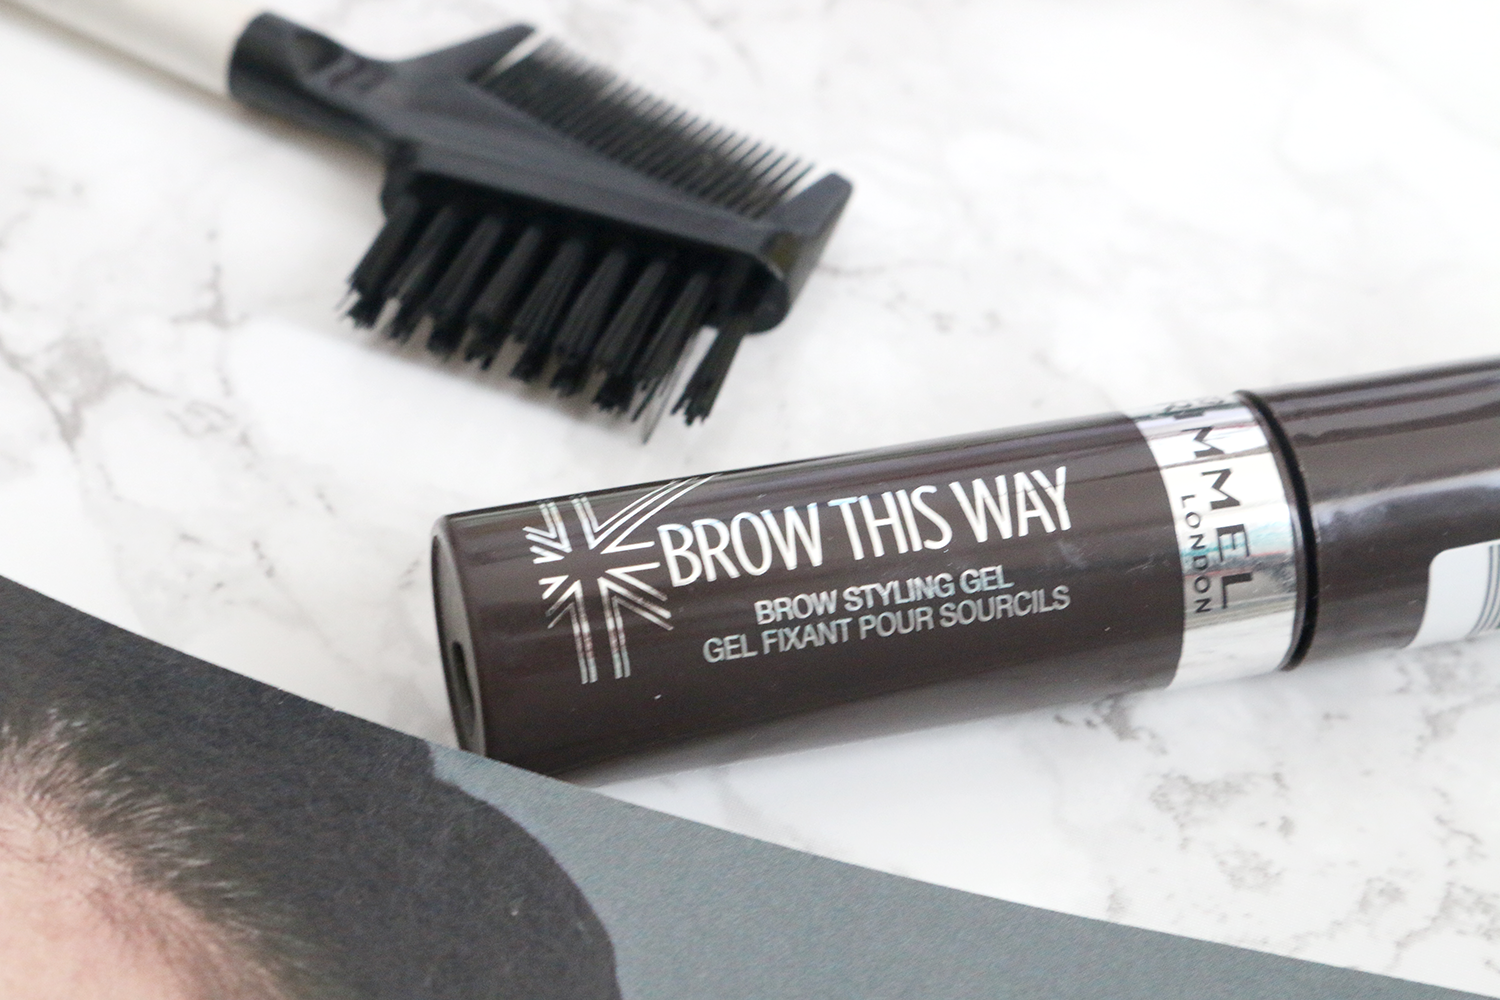 Review of the Rimmel Brow This Way Brow Styling Gel